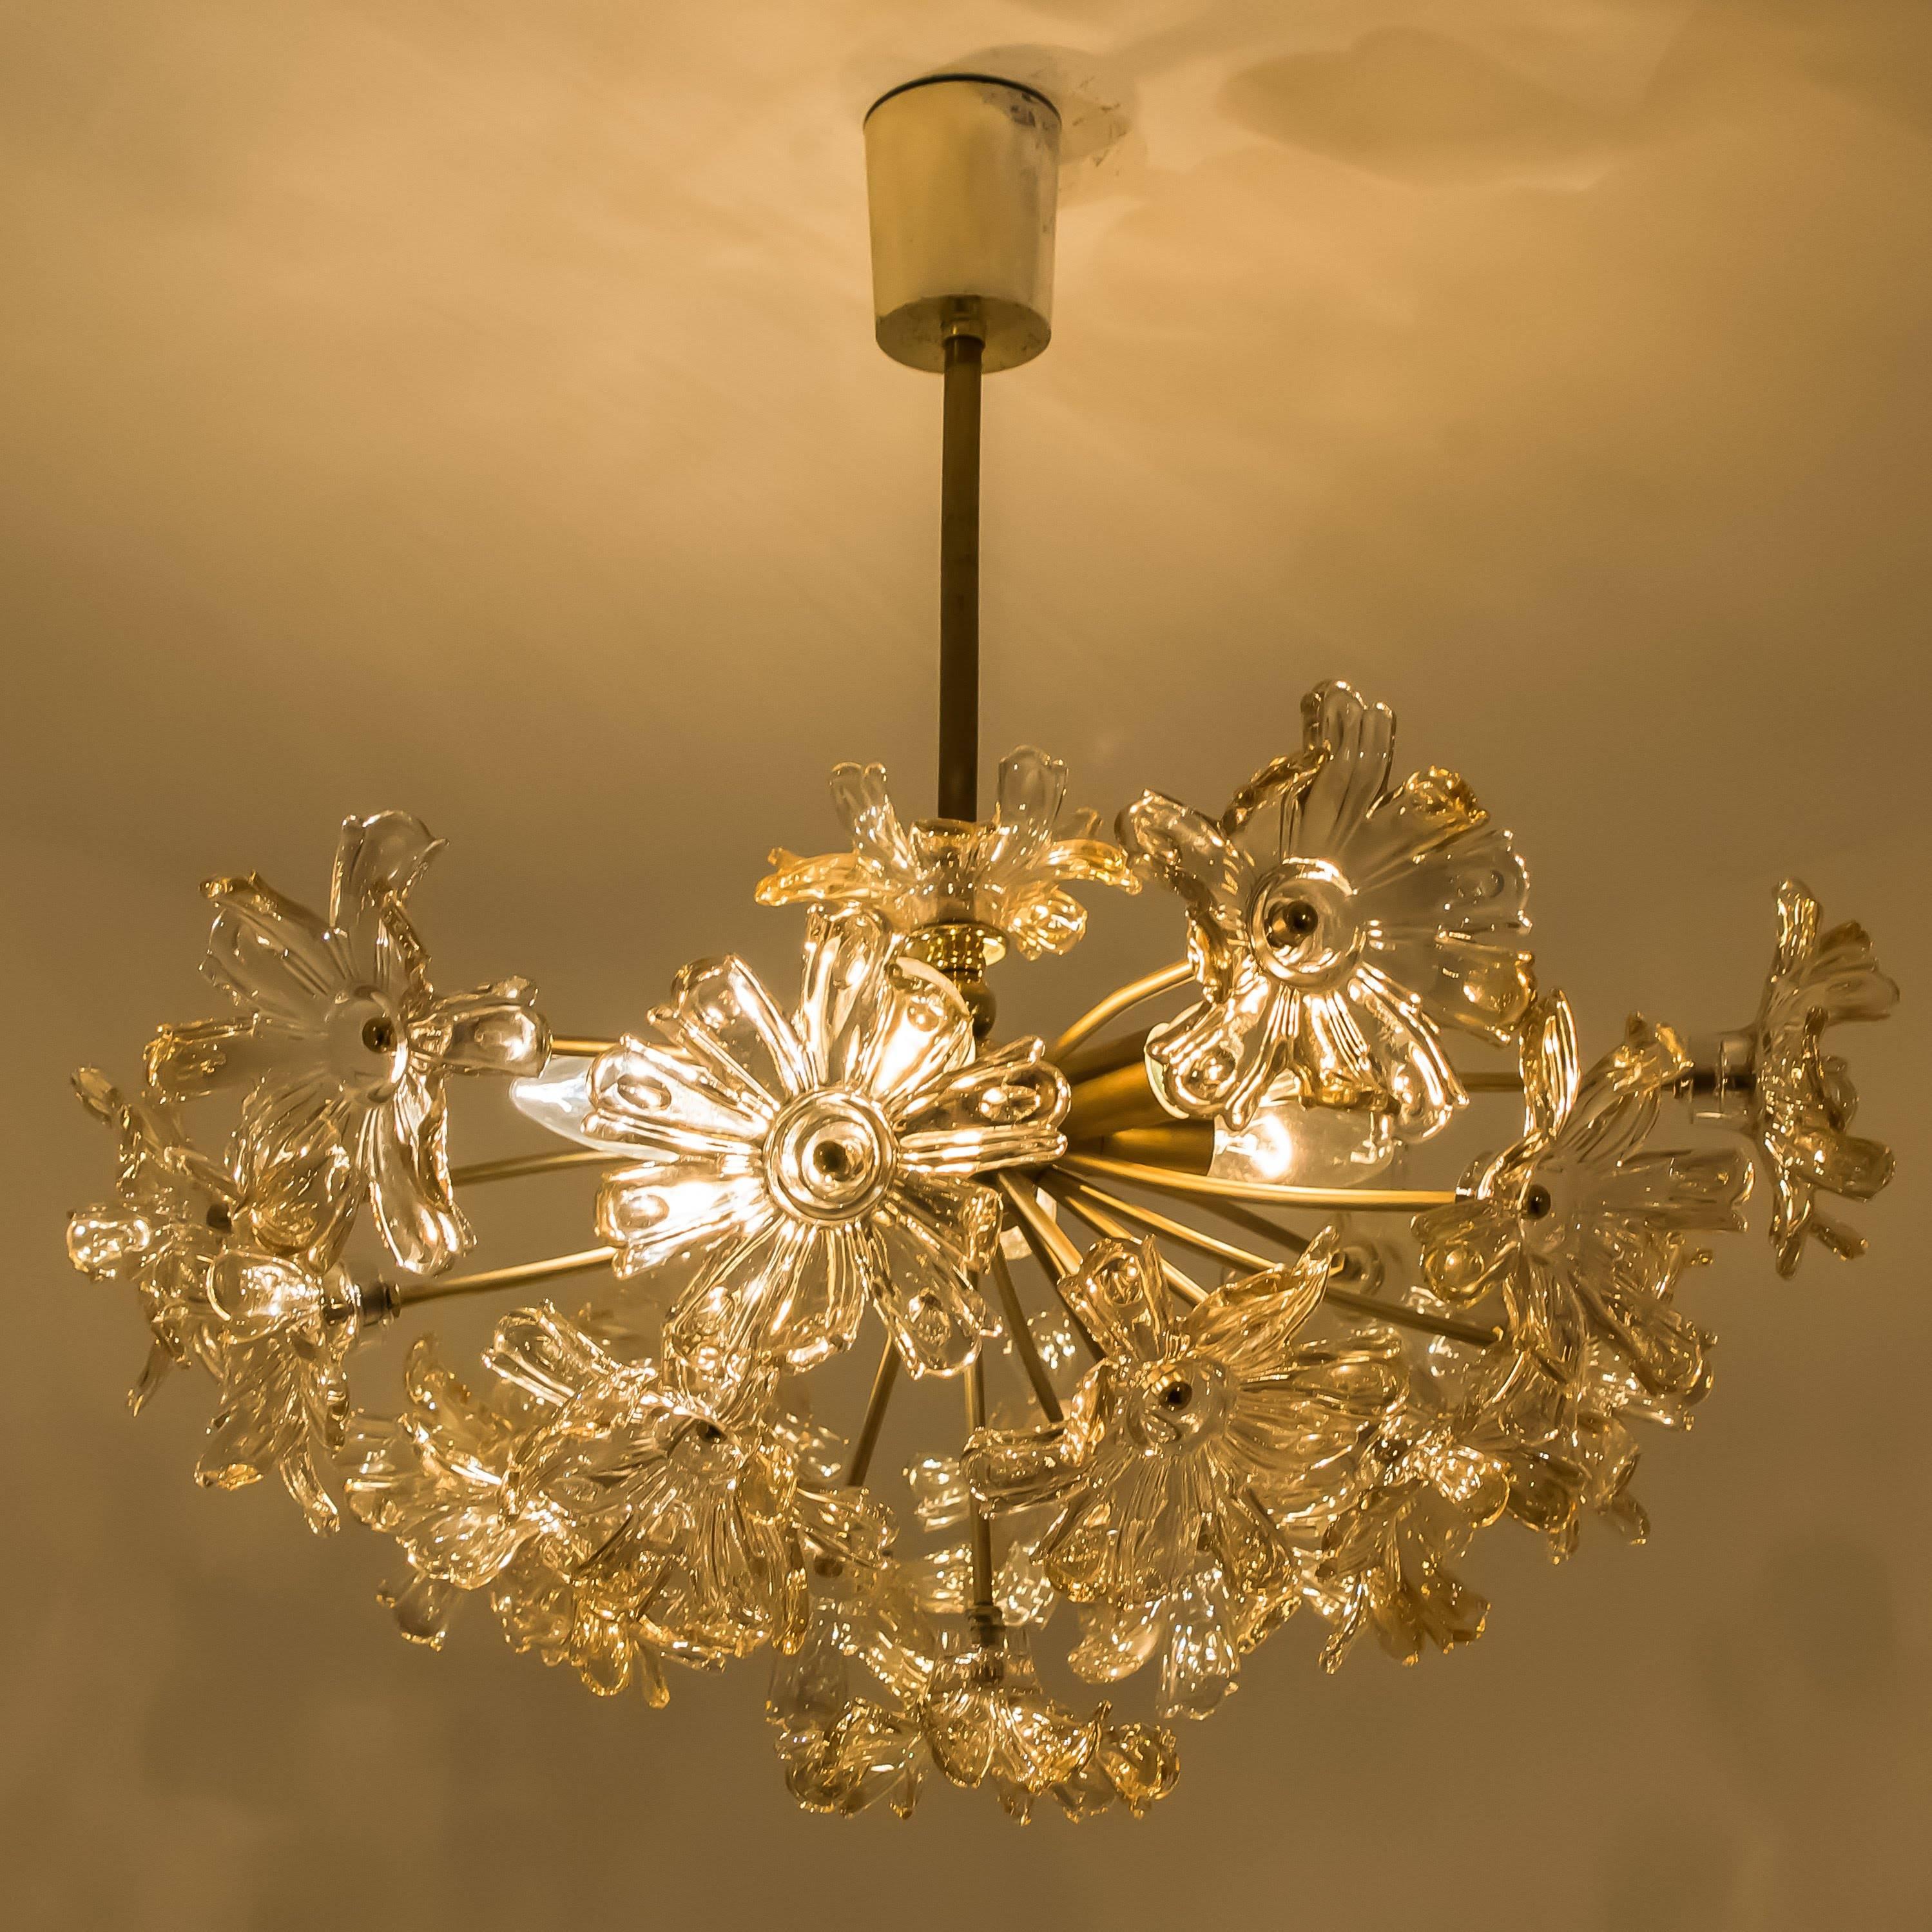 Beautiful hand blows clear glass flower chandelier with brass frame in style of Venini, Italy, circa 1960s. Illuminates beautifully.

Measures: Diameter in (53 cm), height body without chain in (33 cm) / includes chain and canopy inch (60 cm). The